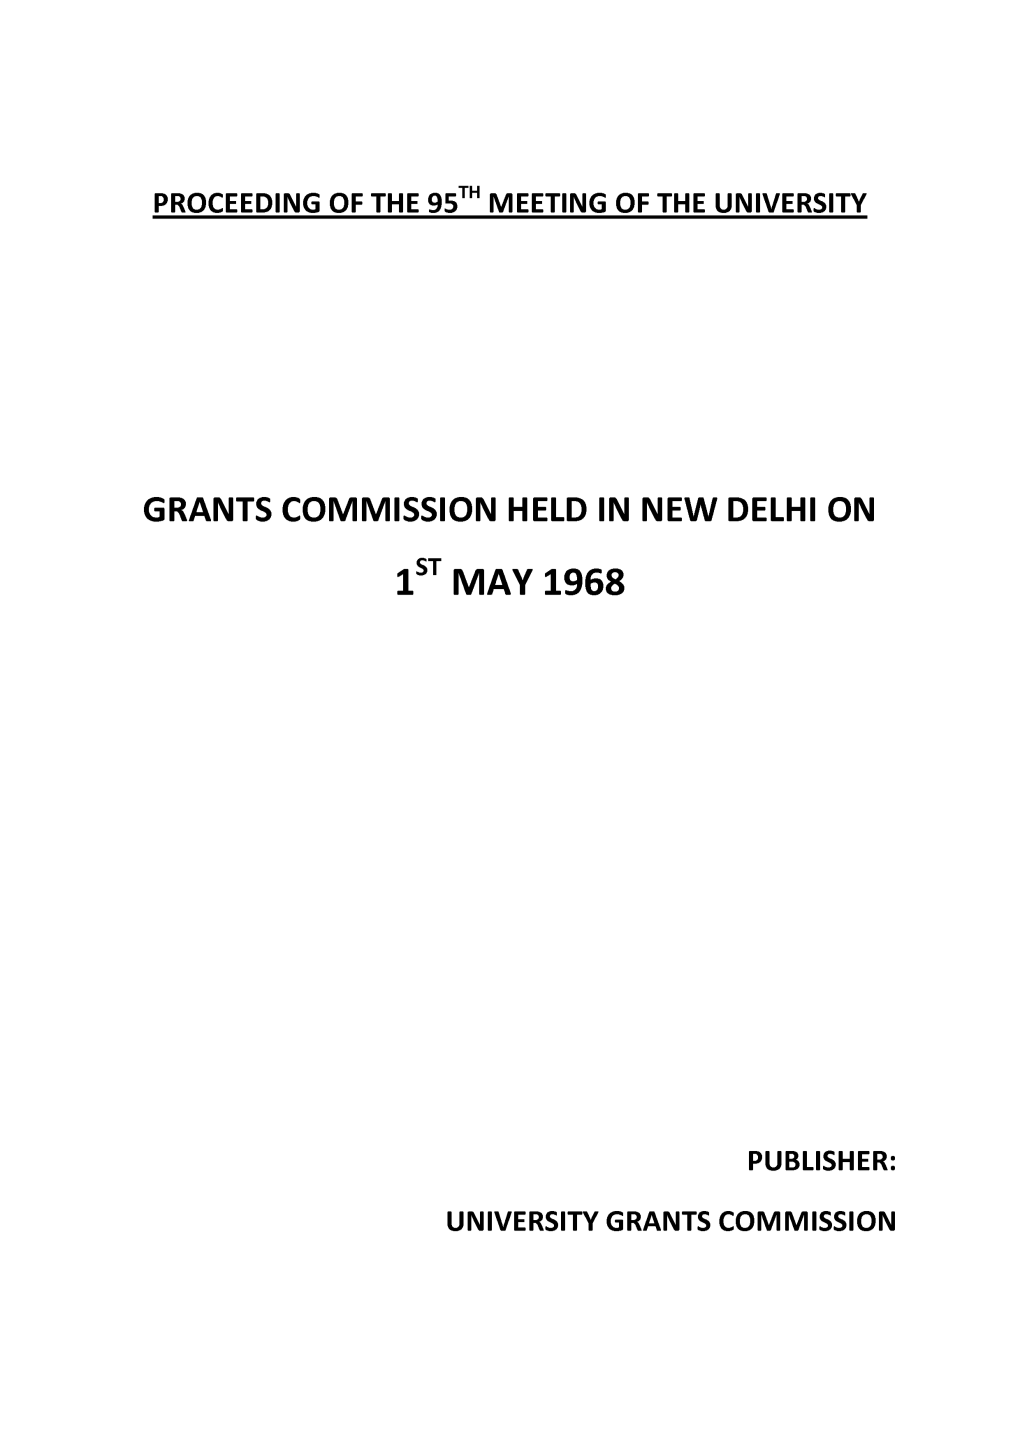 Grants Commission Held in New Delhi On